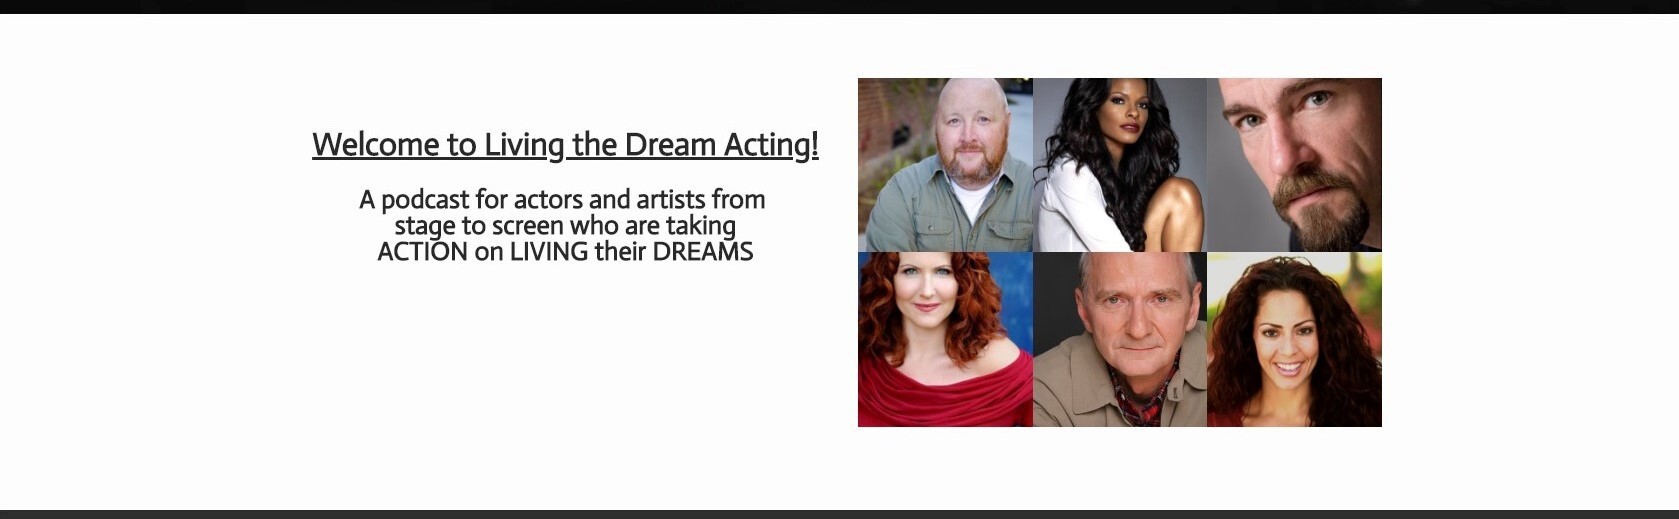 Living the Dream Acting header image 1